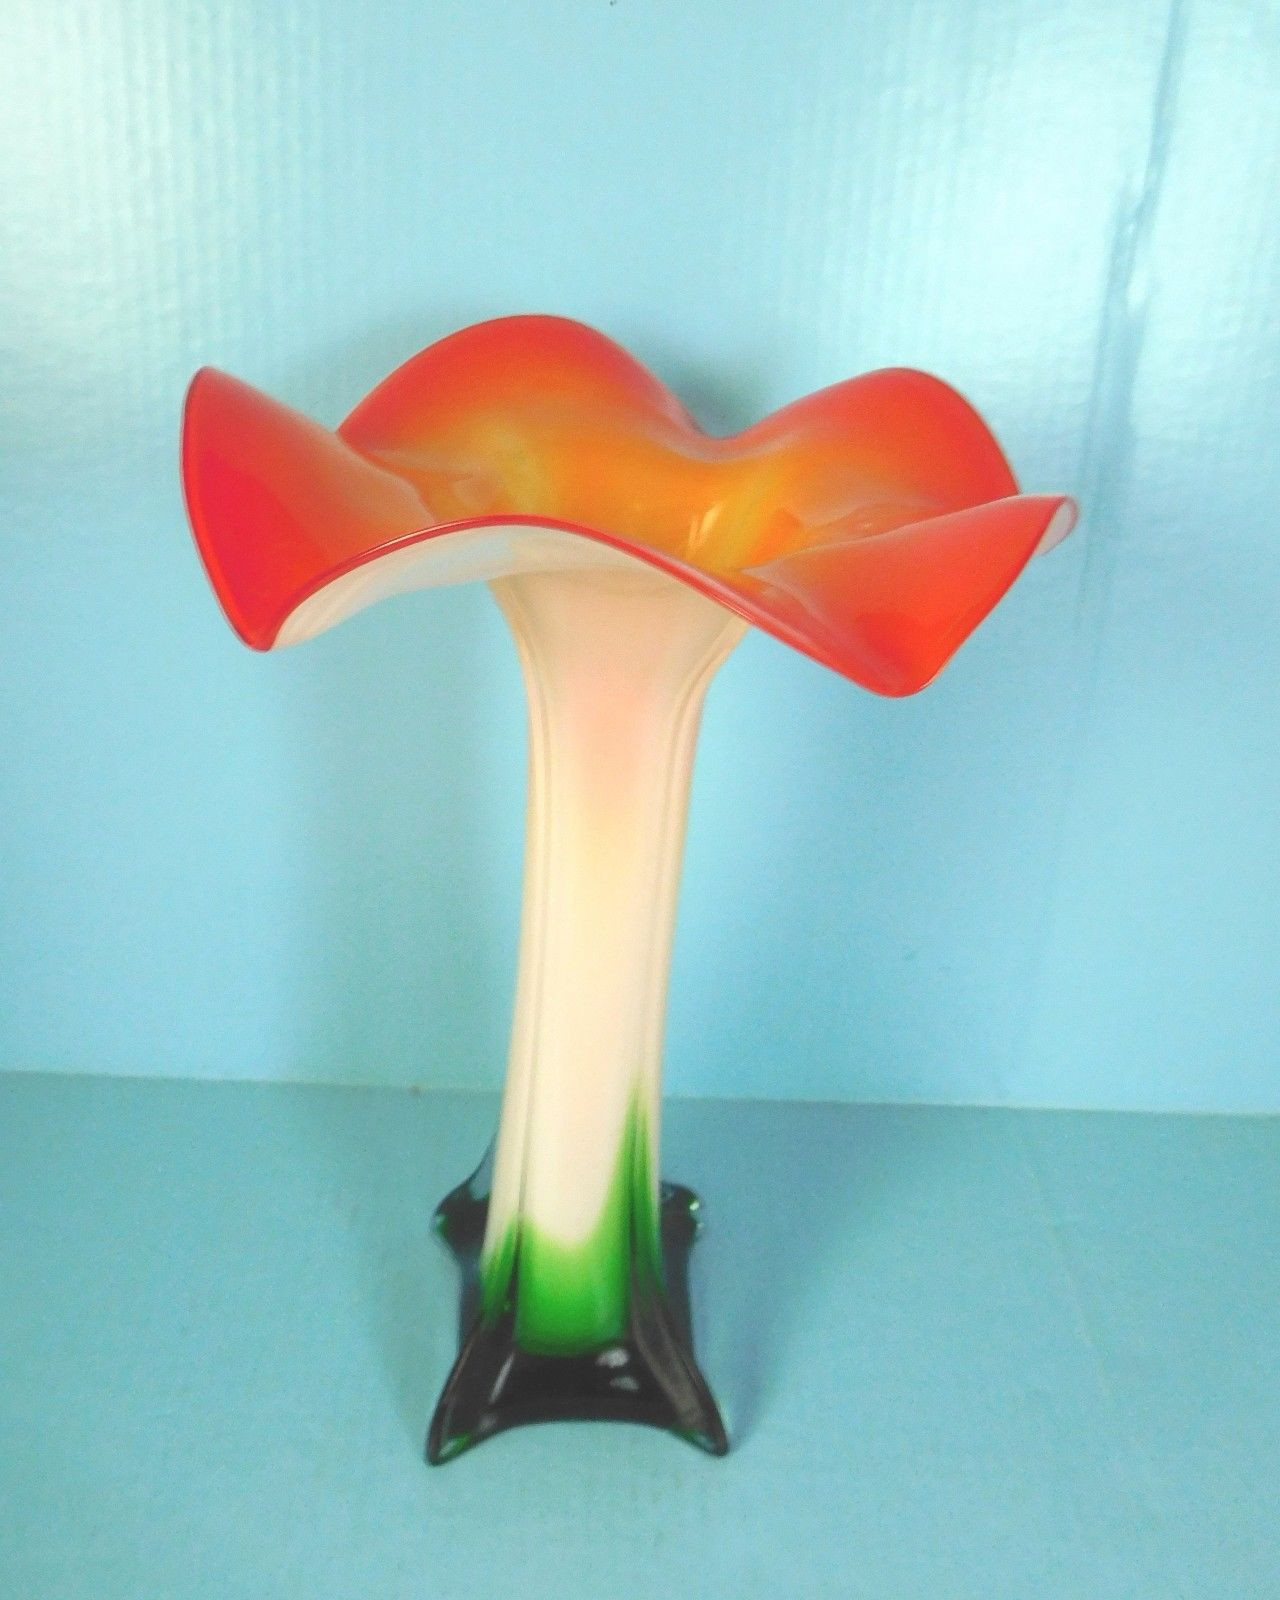 murano glass fish vase of flower petal retro art glass vase 14 25 tall poppy red green throughout 1 of 8 see more